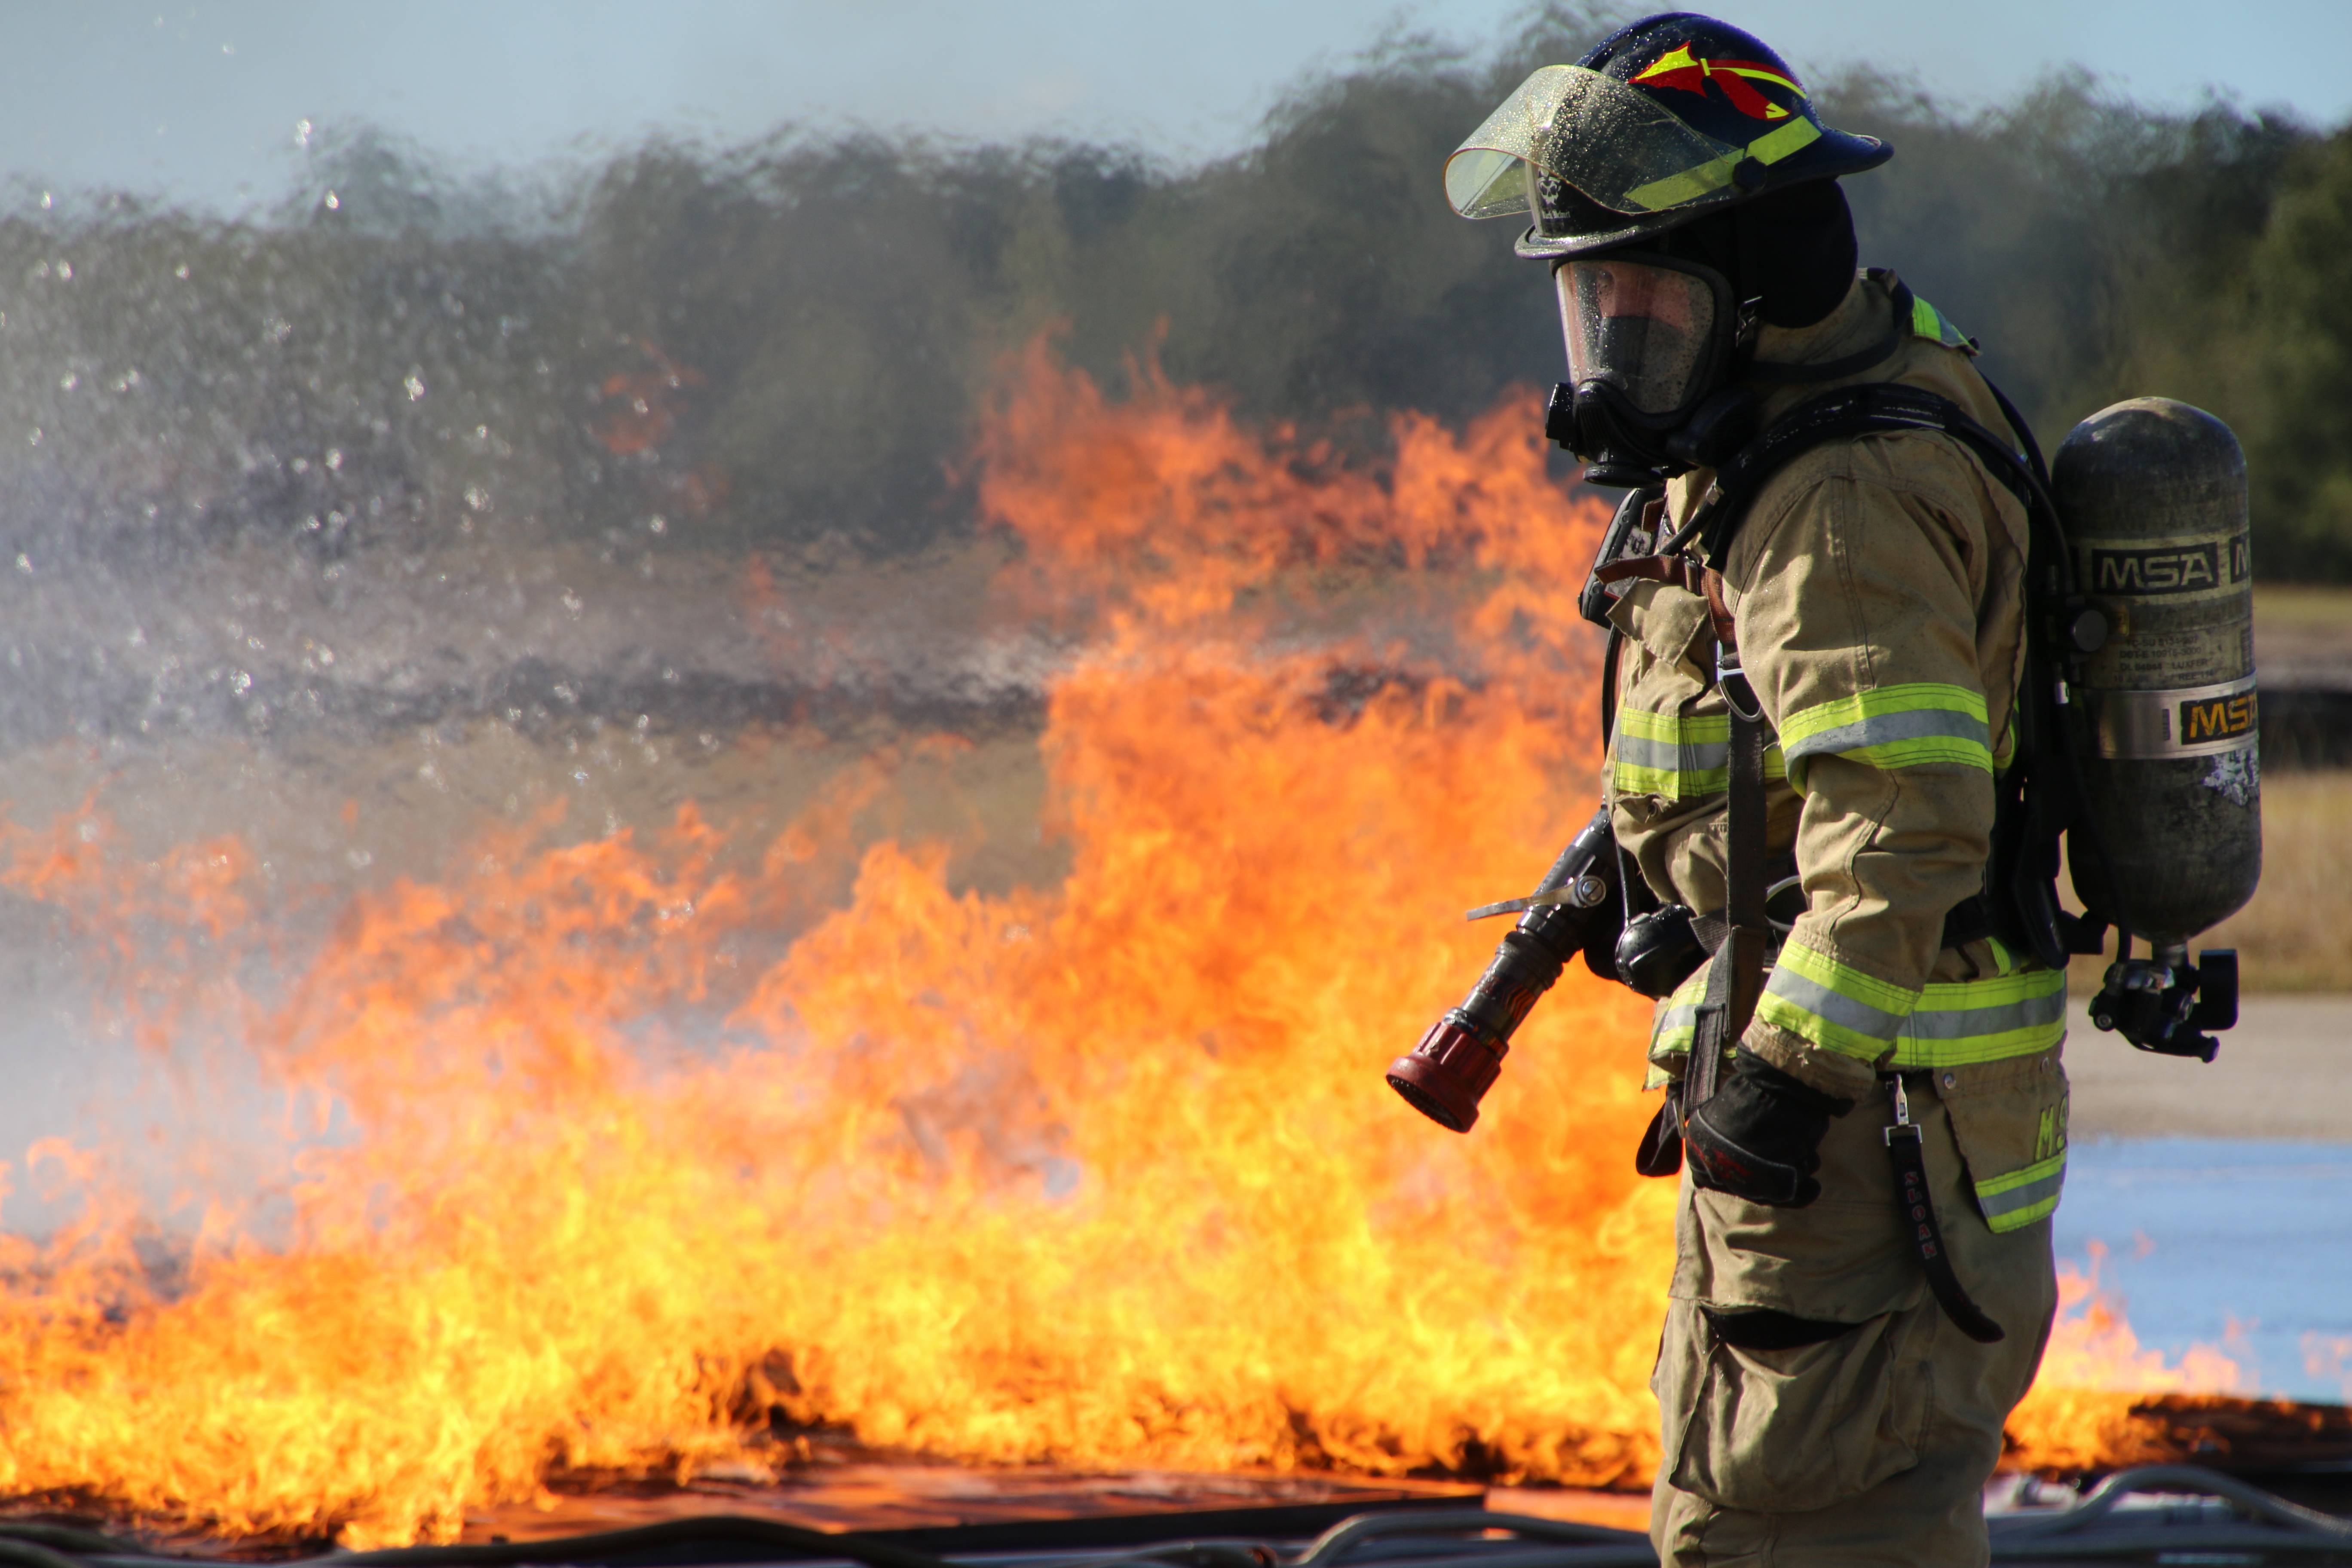 A picture of ARFF firefighter in live fire training